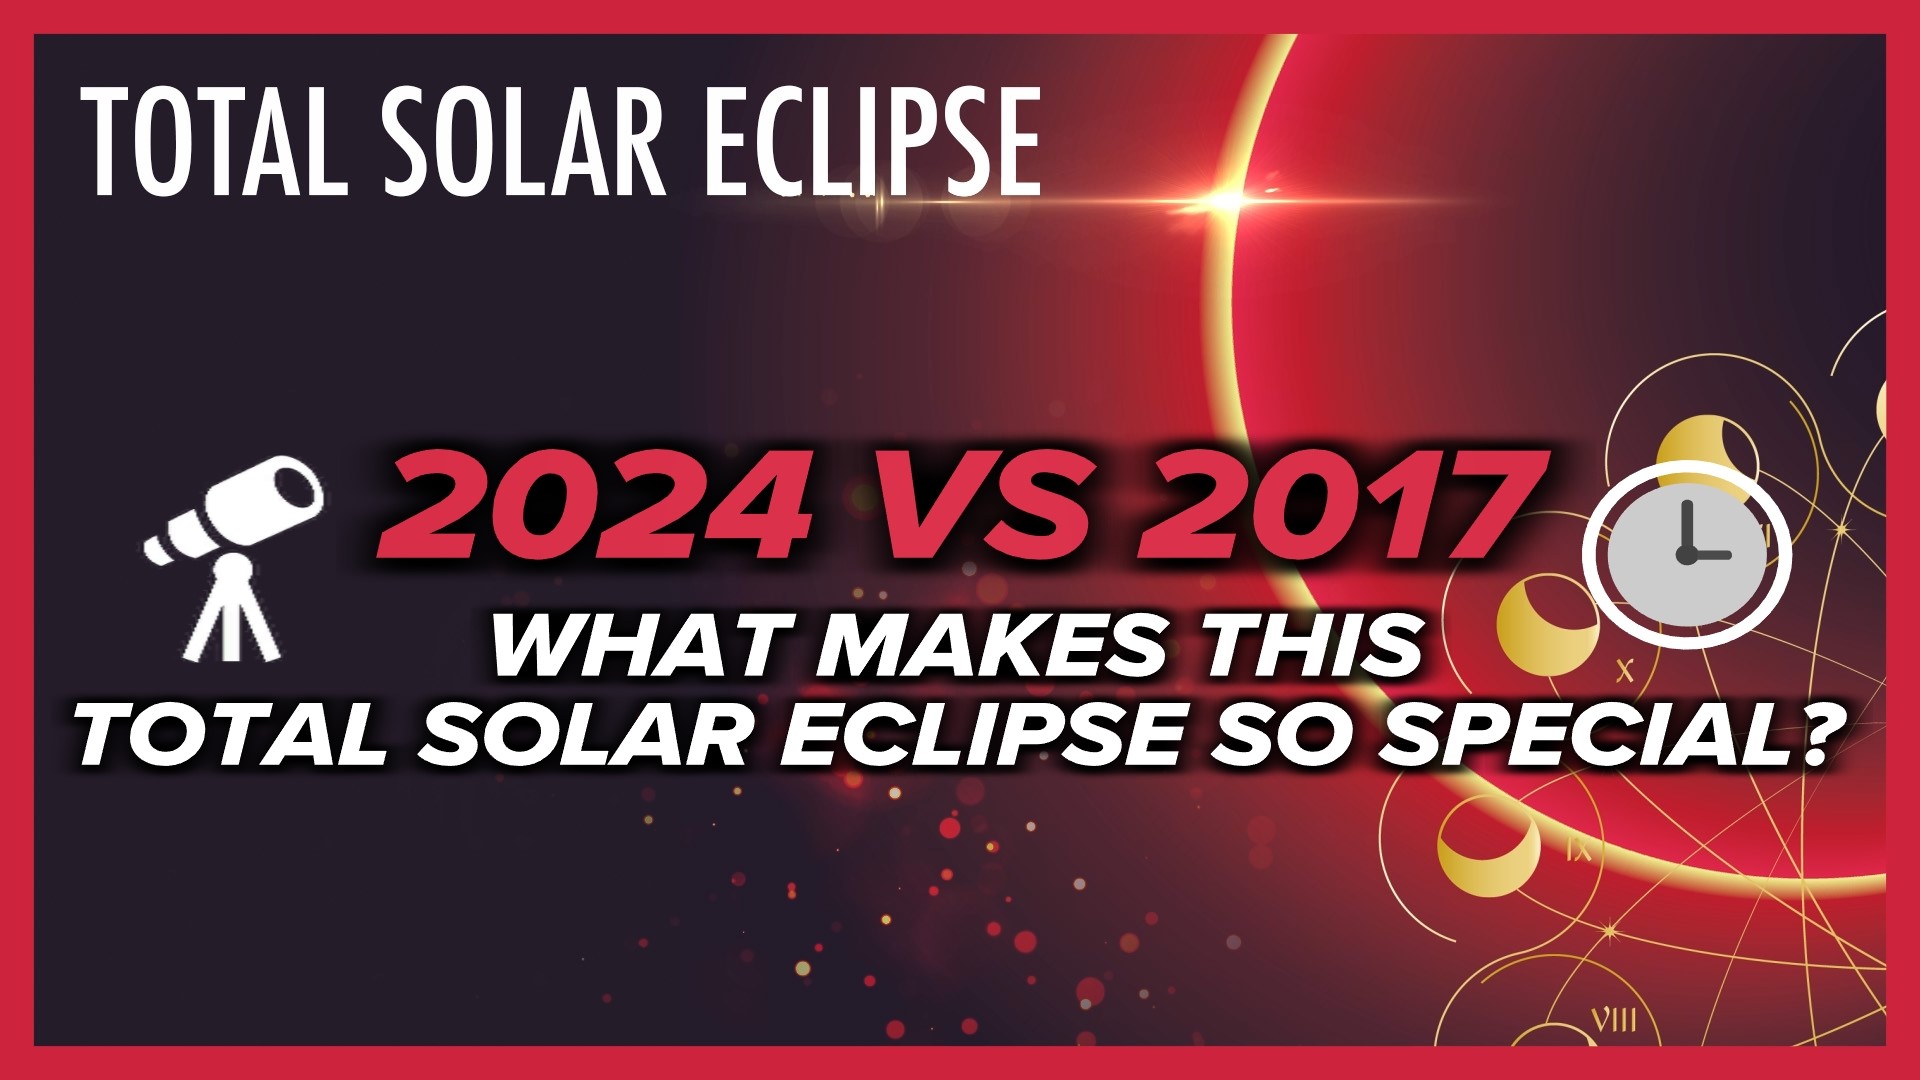 Often known as the 'Great American Eclipse', 2017 brought a show-stopping total solar eclipse. Here's why 2024 will be even more impressive.